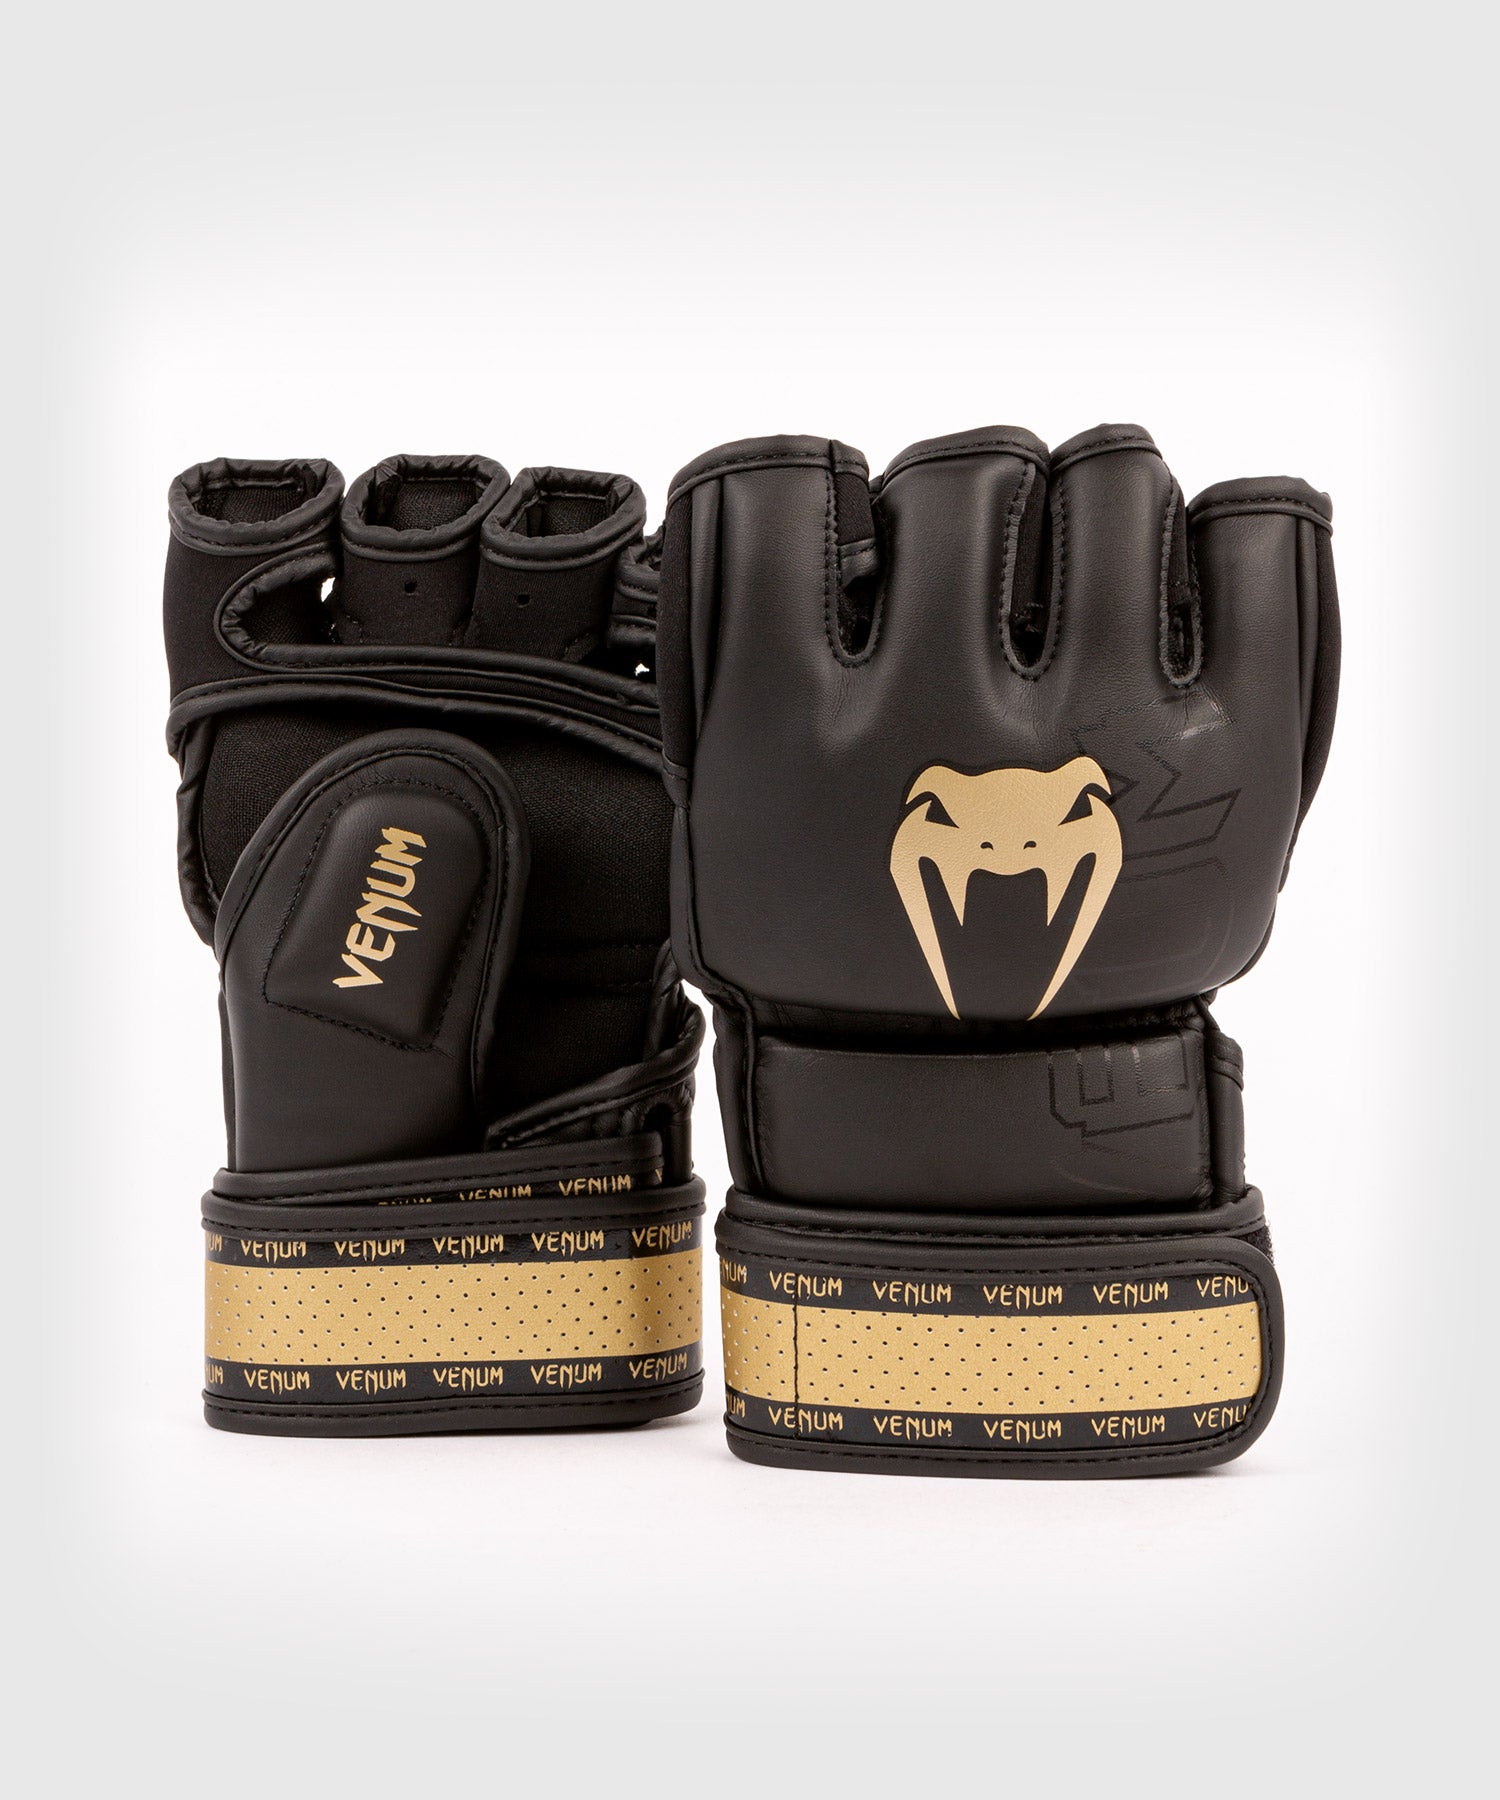 Protector Tibial Venum Kontact Black / Gold TALLE M – UNIVERSO MMA